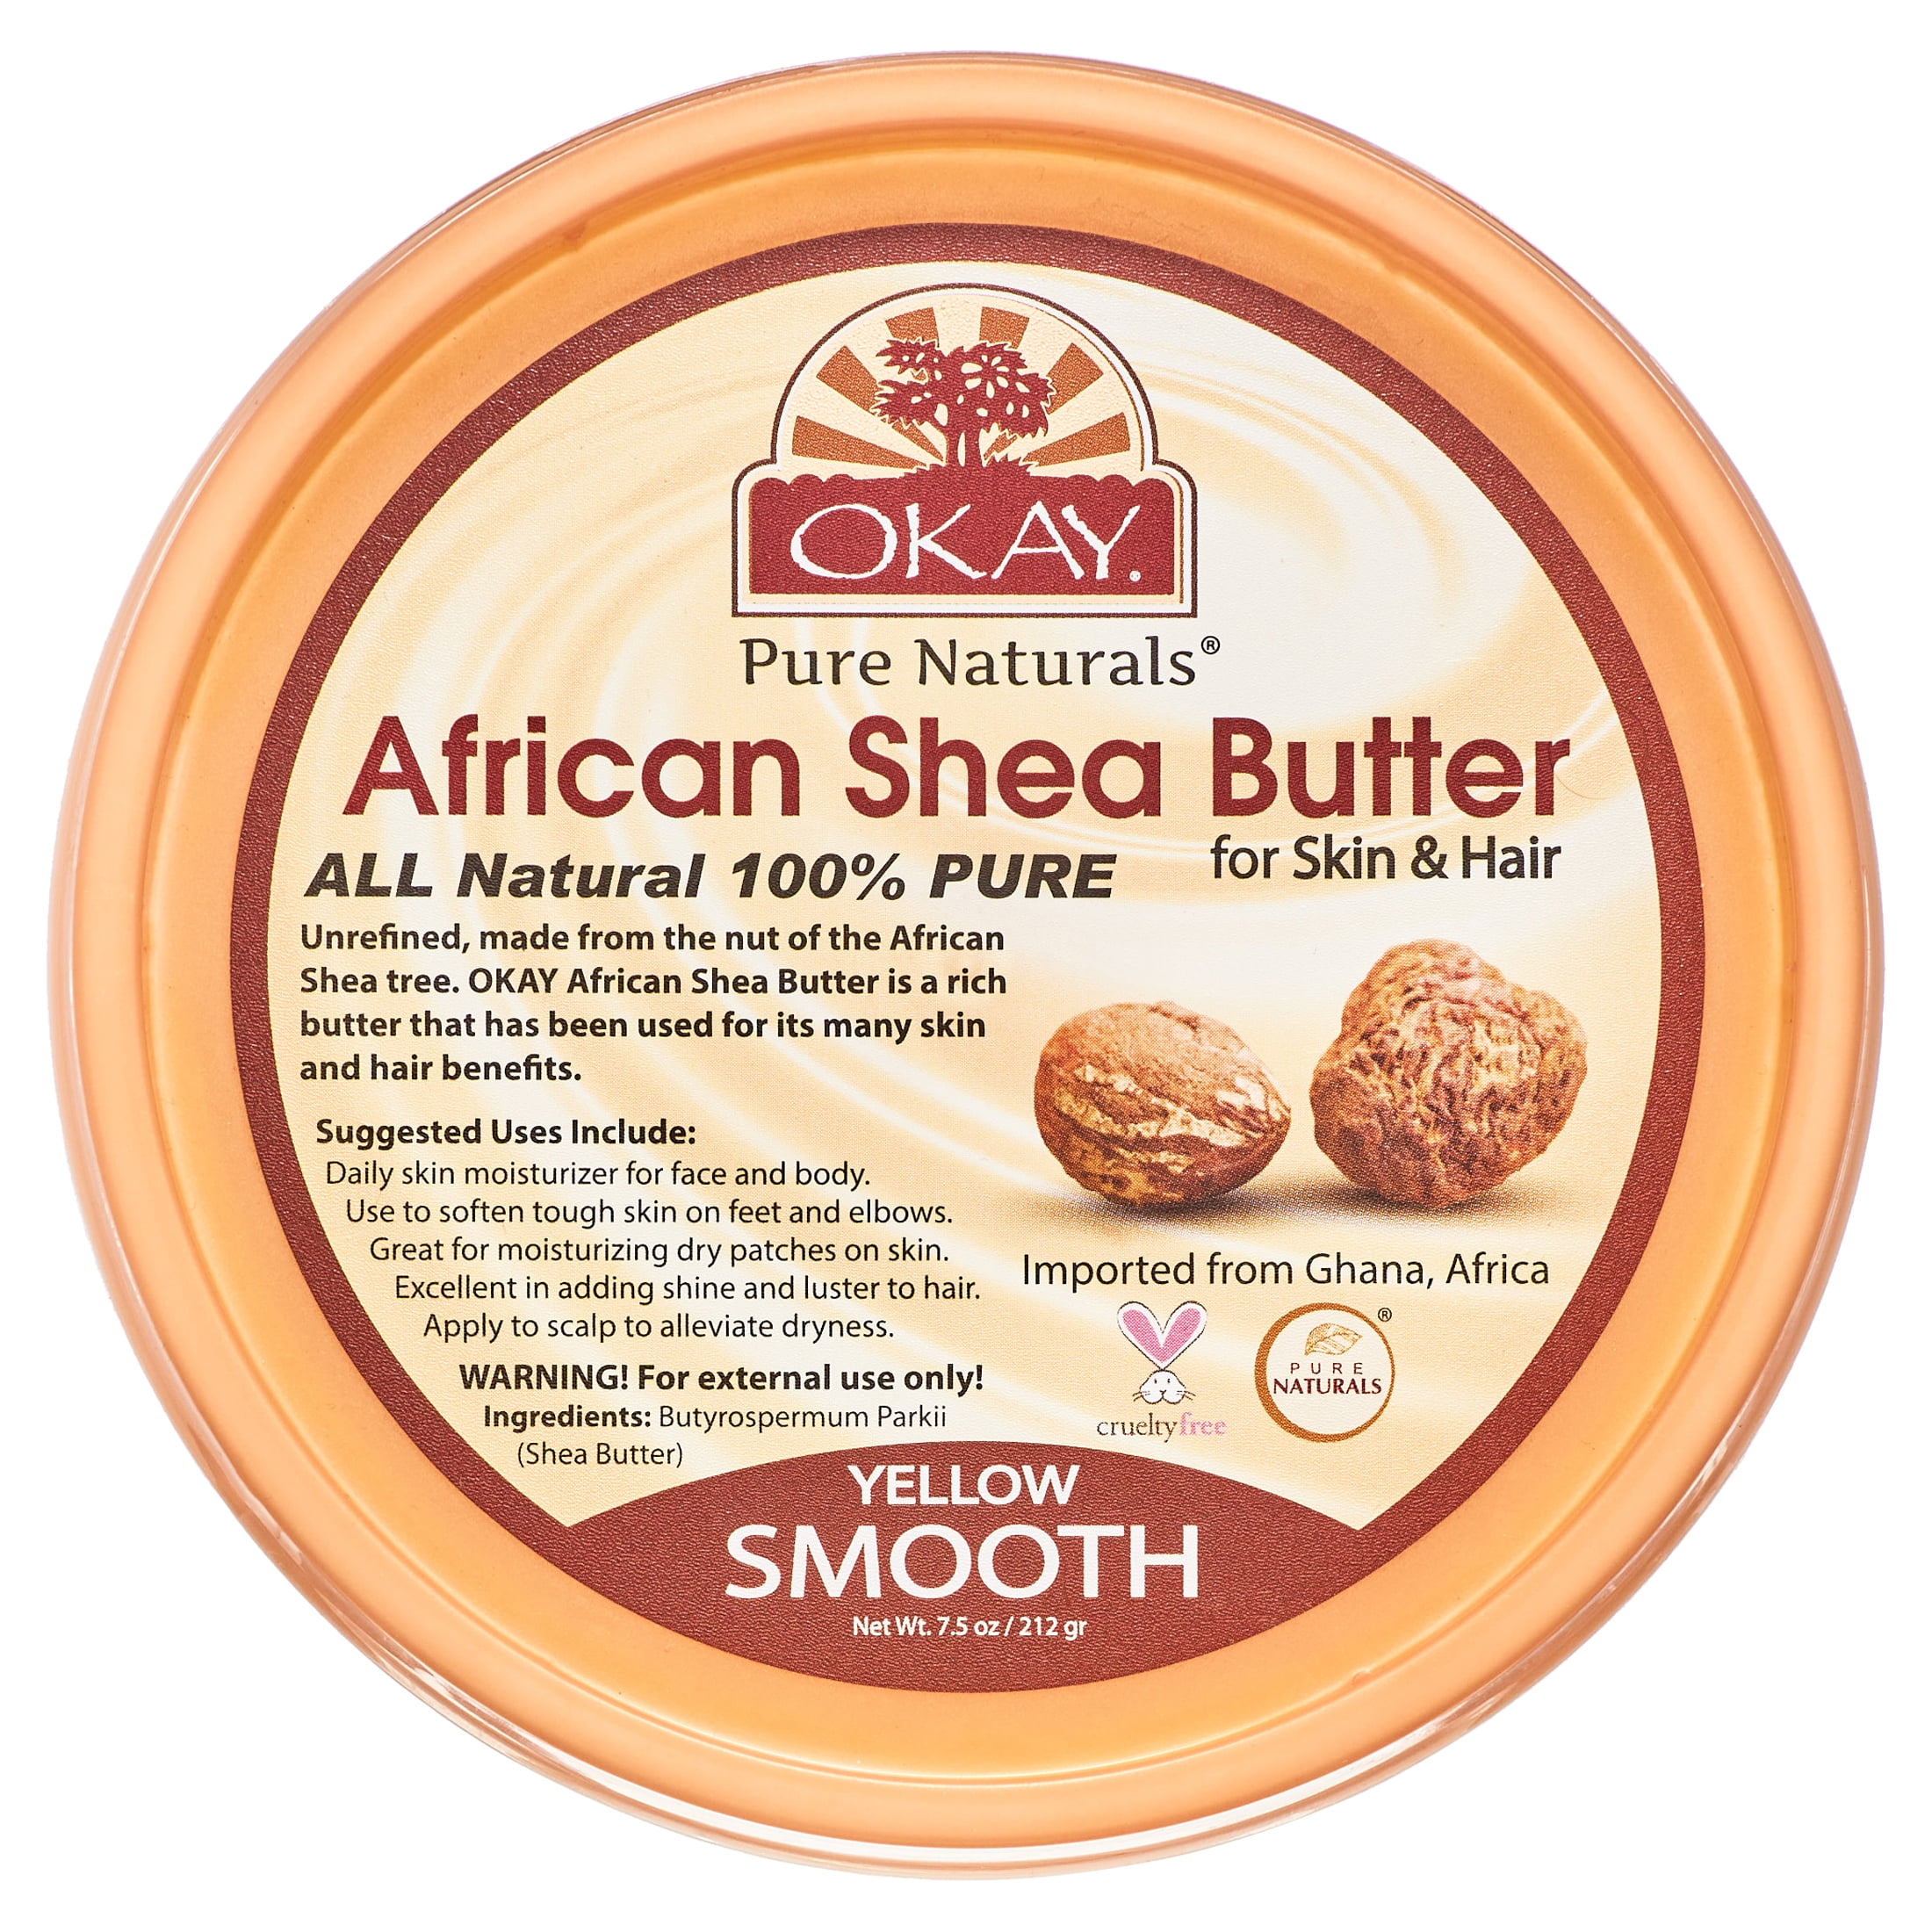  Okay Smooth All Natural,100% Pure Unrefined Daily Skin  Moisturizer For Skin & Hair Yellow, Shea Butter, 13 oz : Body Butters :  Beauty & Personal Care